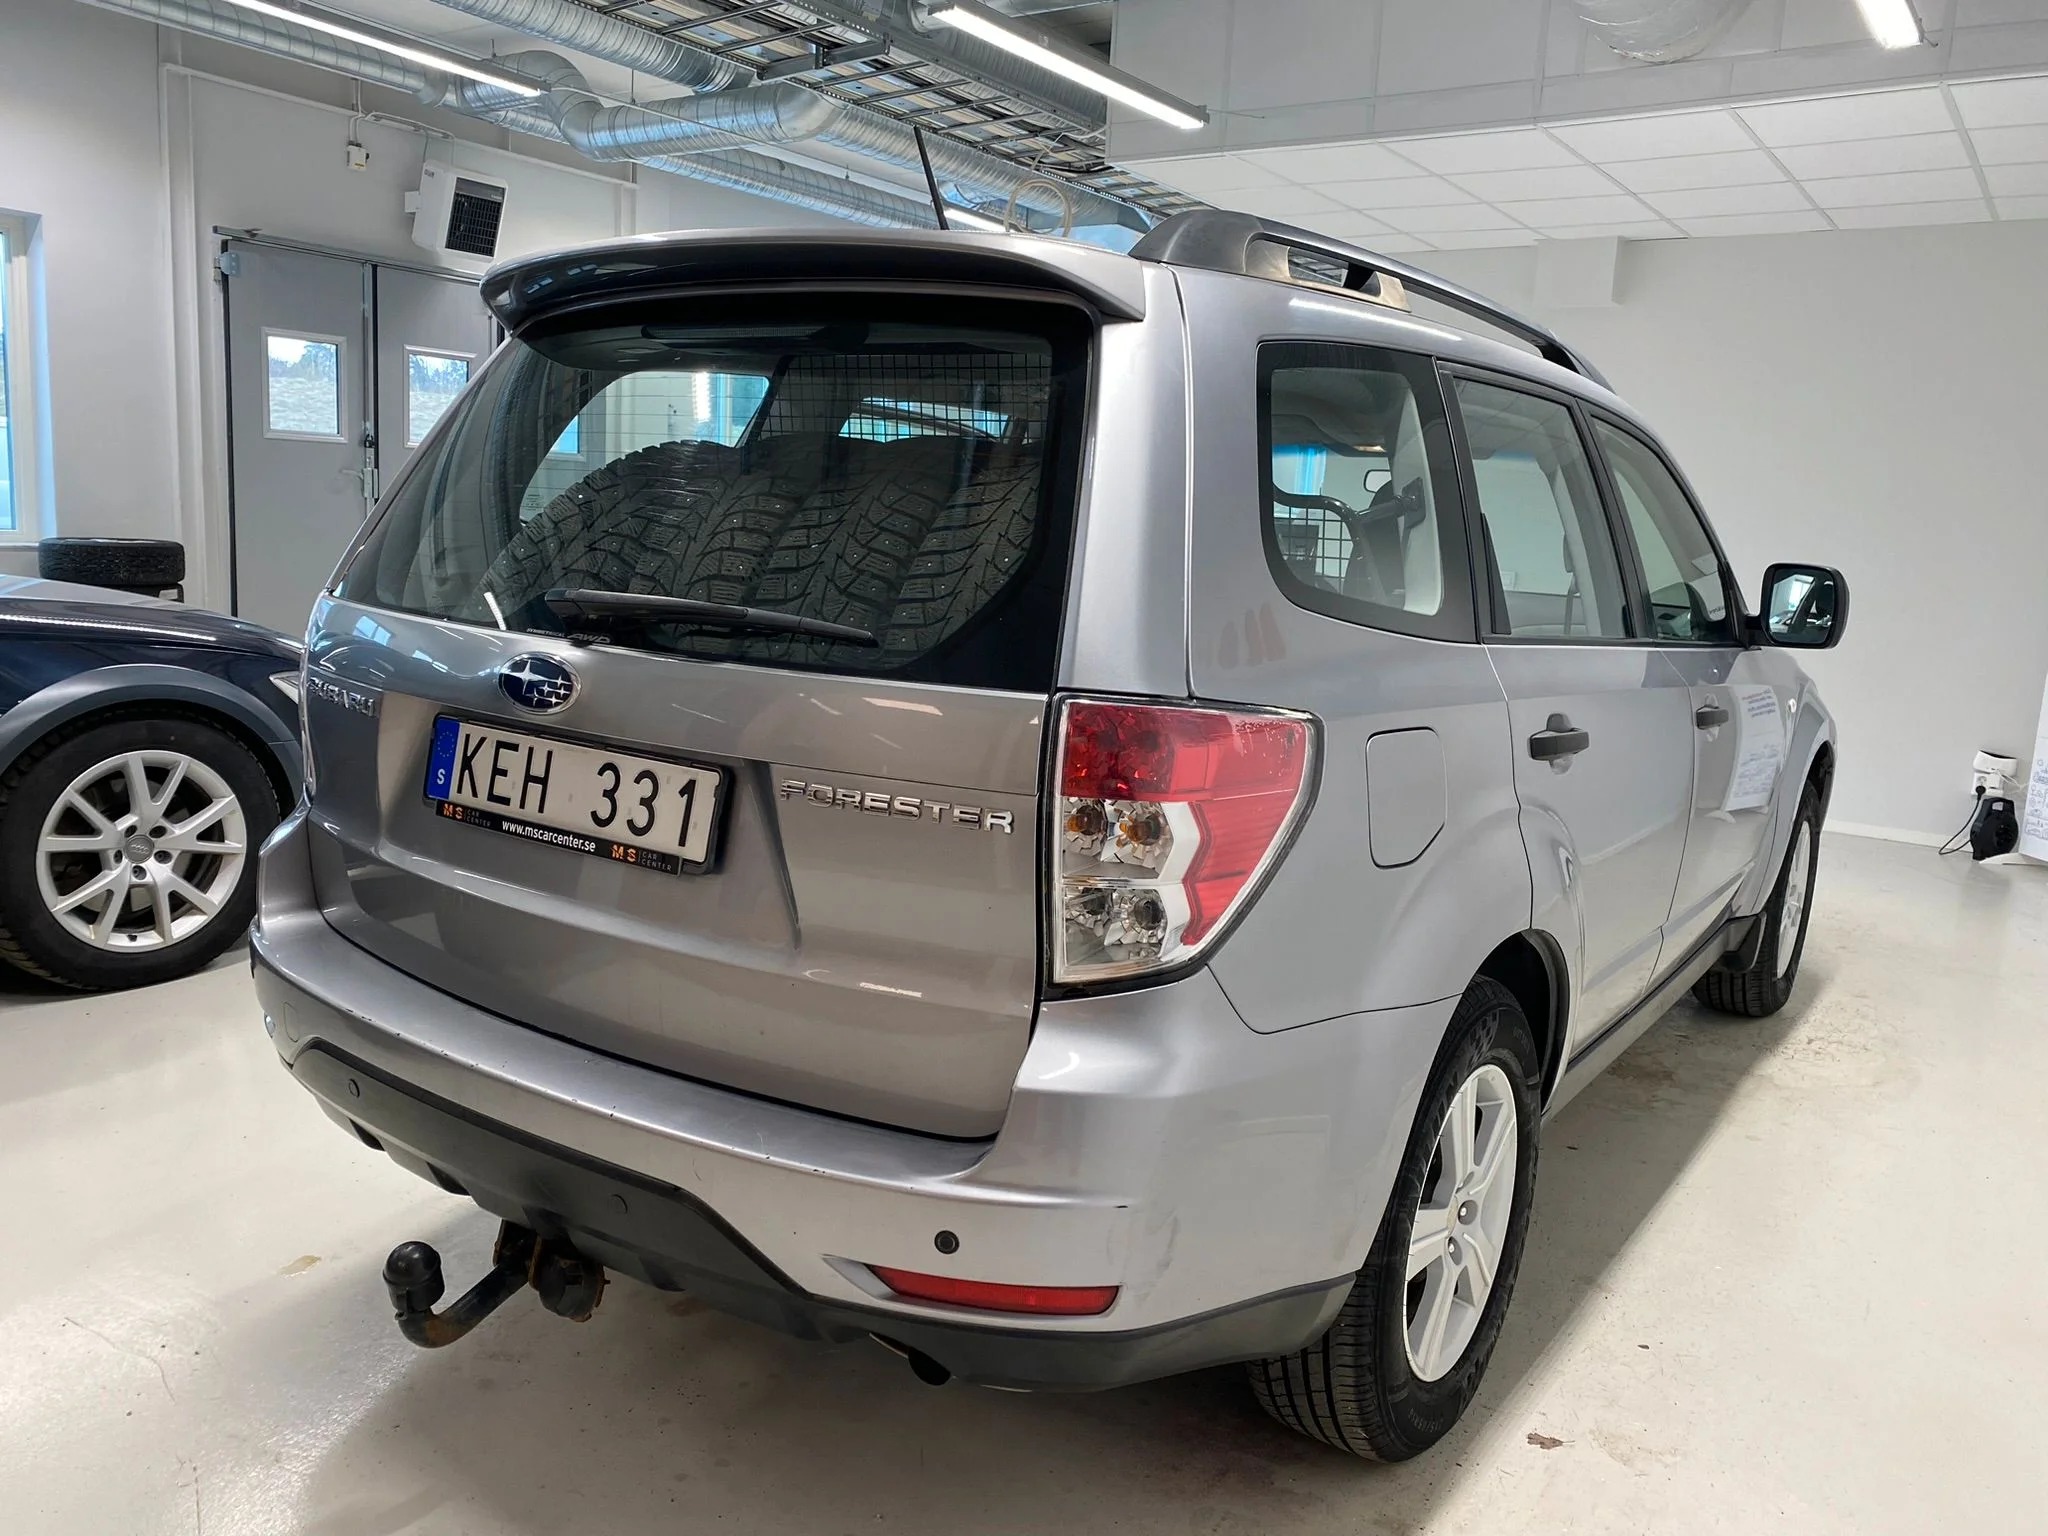 Subaru Forester 2.0 X 4WD Automatisk, 150hk, 2010